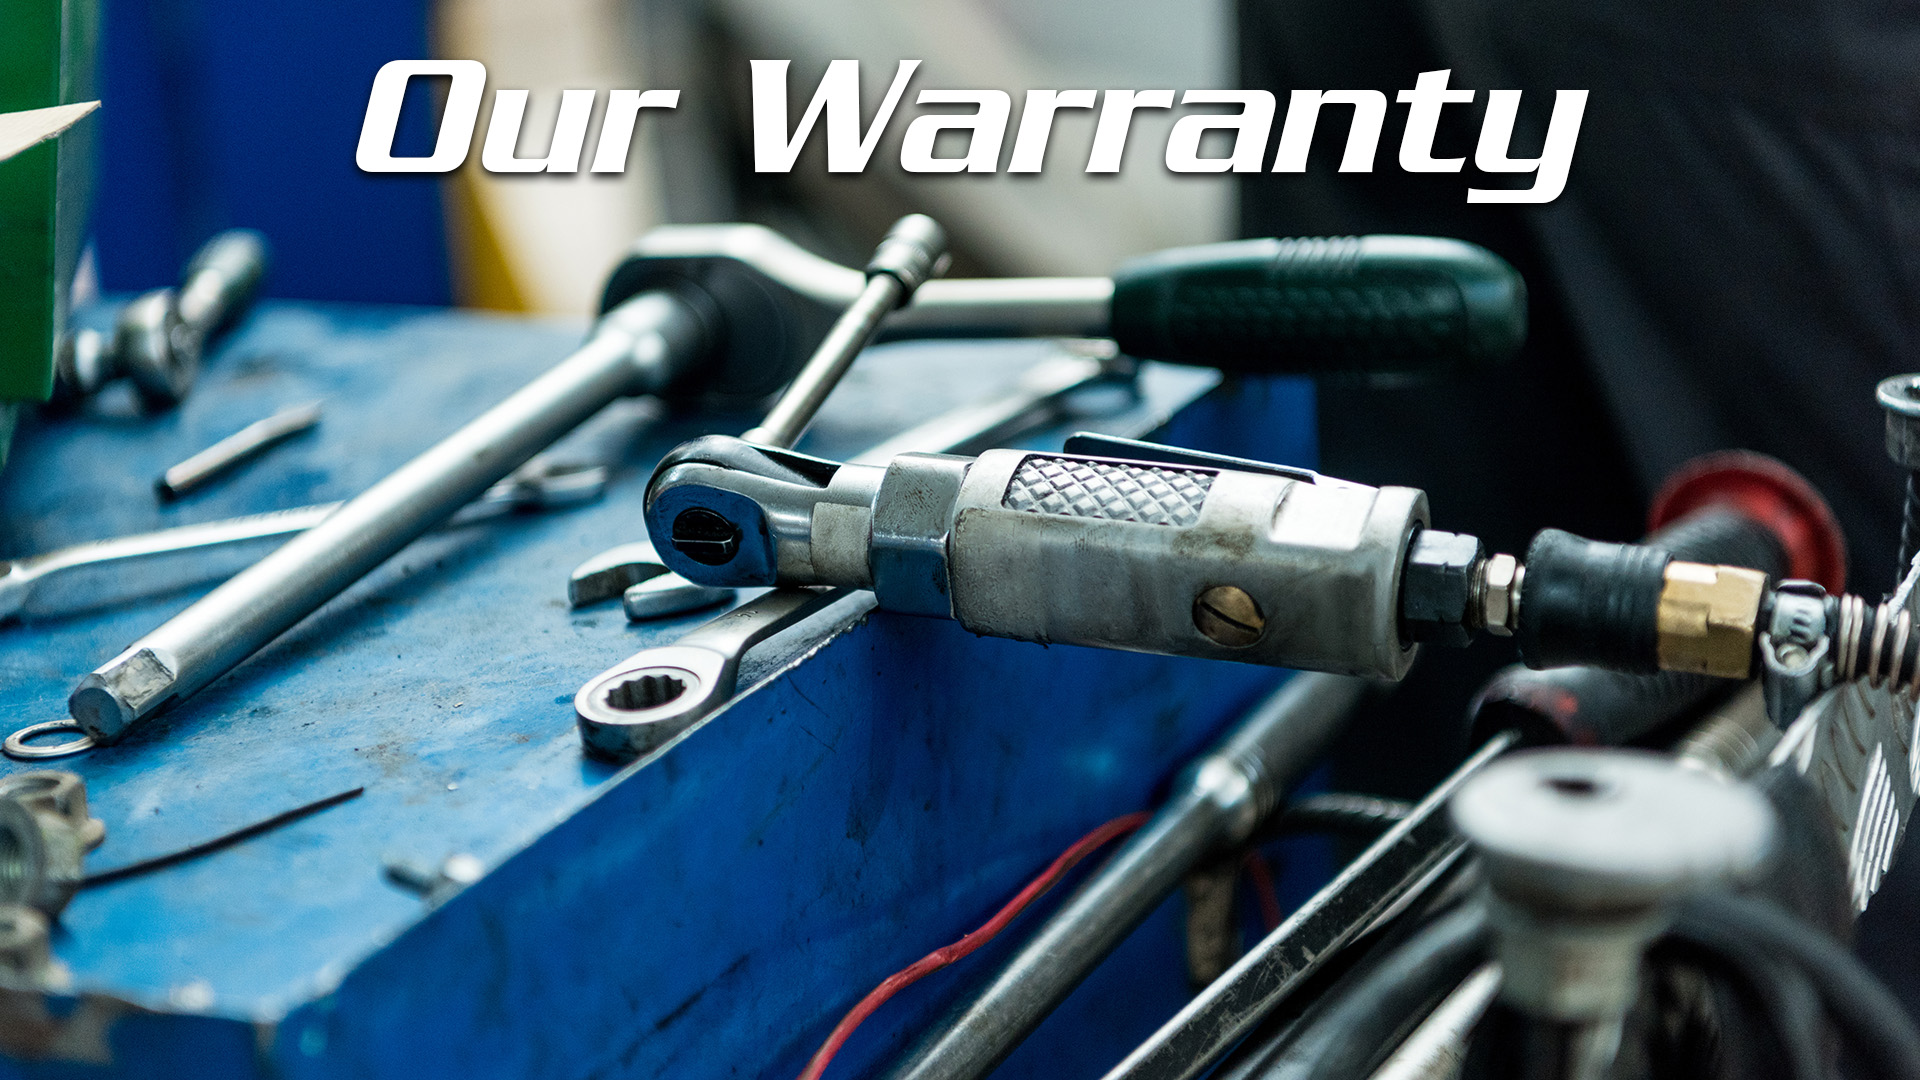 Deep Stage Tuning & Performance - Our Warranty